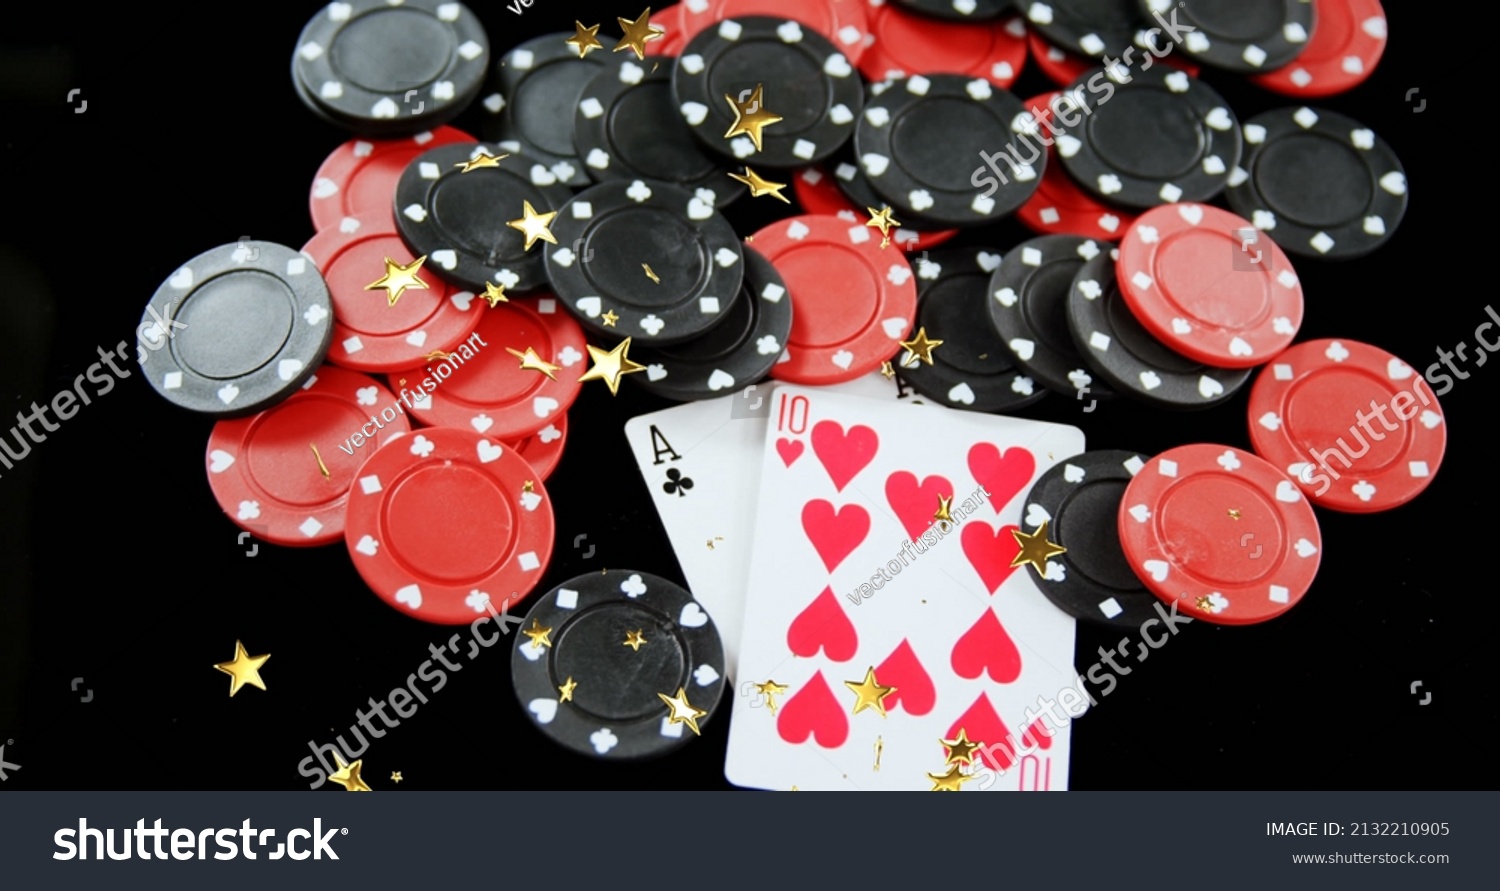 Image of moving stars over poker chips and cards on black background. hazard and casino concept digitally generated image. #2132210905